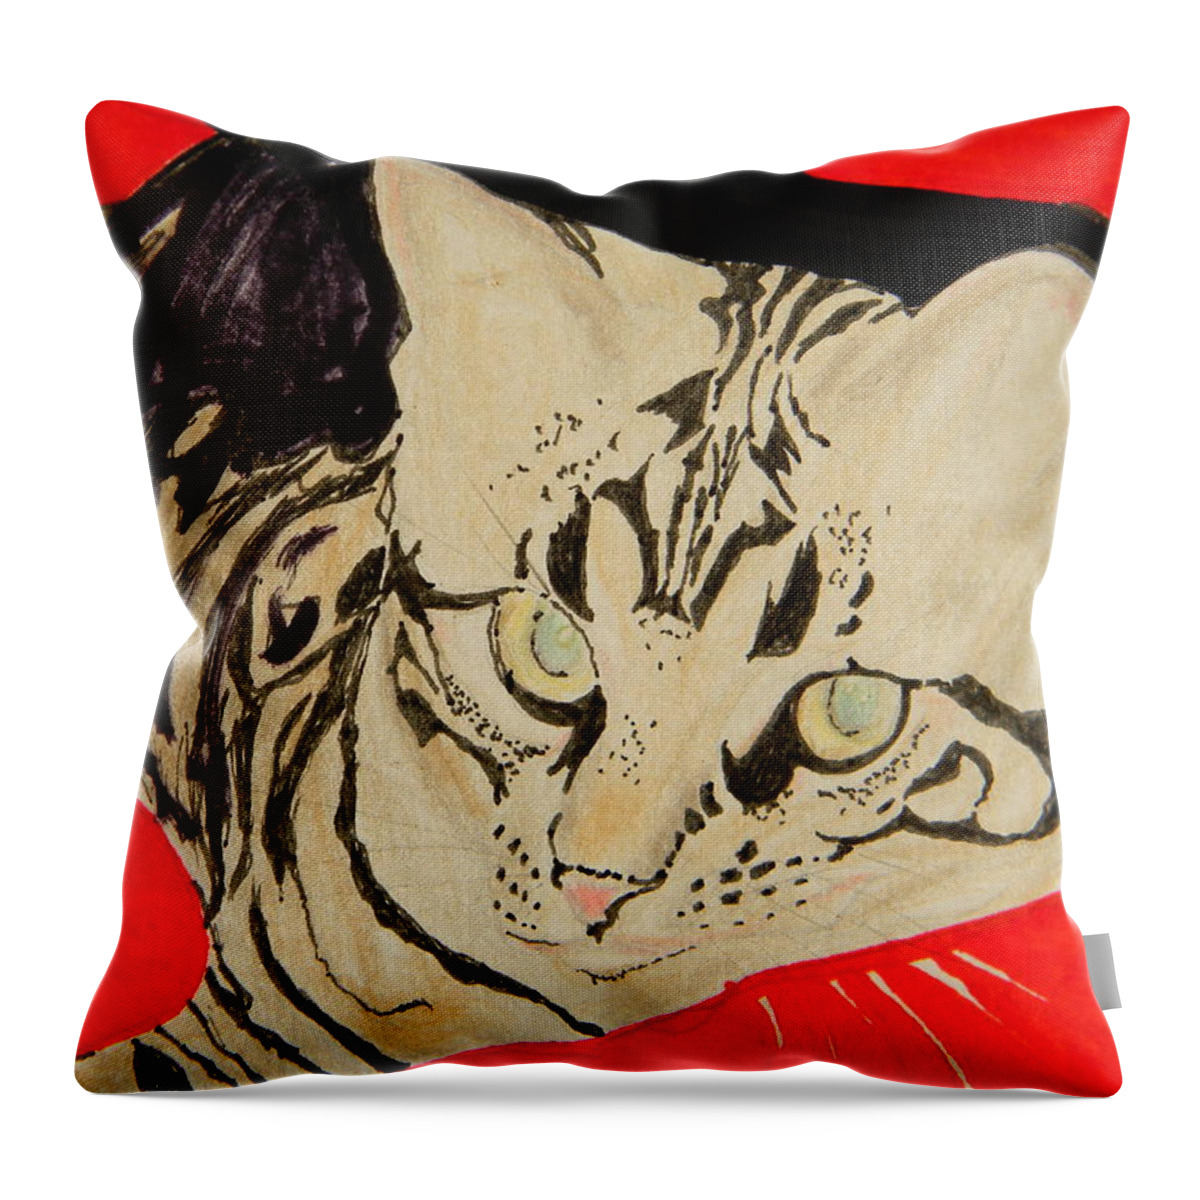 Kitten Throw Pillow featuring the drawing Blue II by Marwan George Khoury